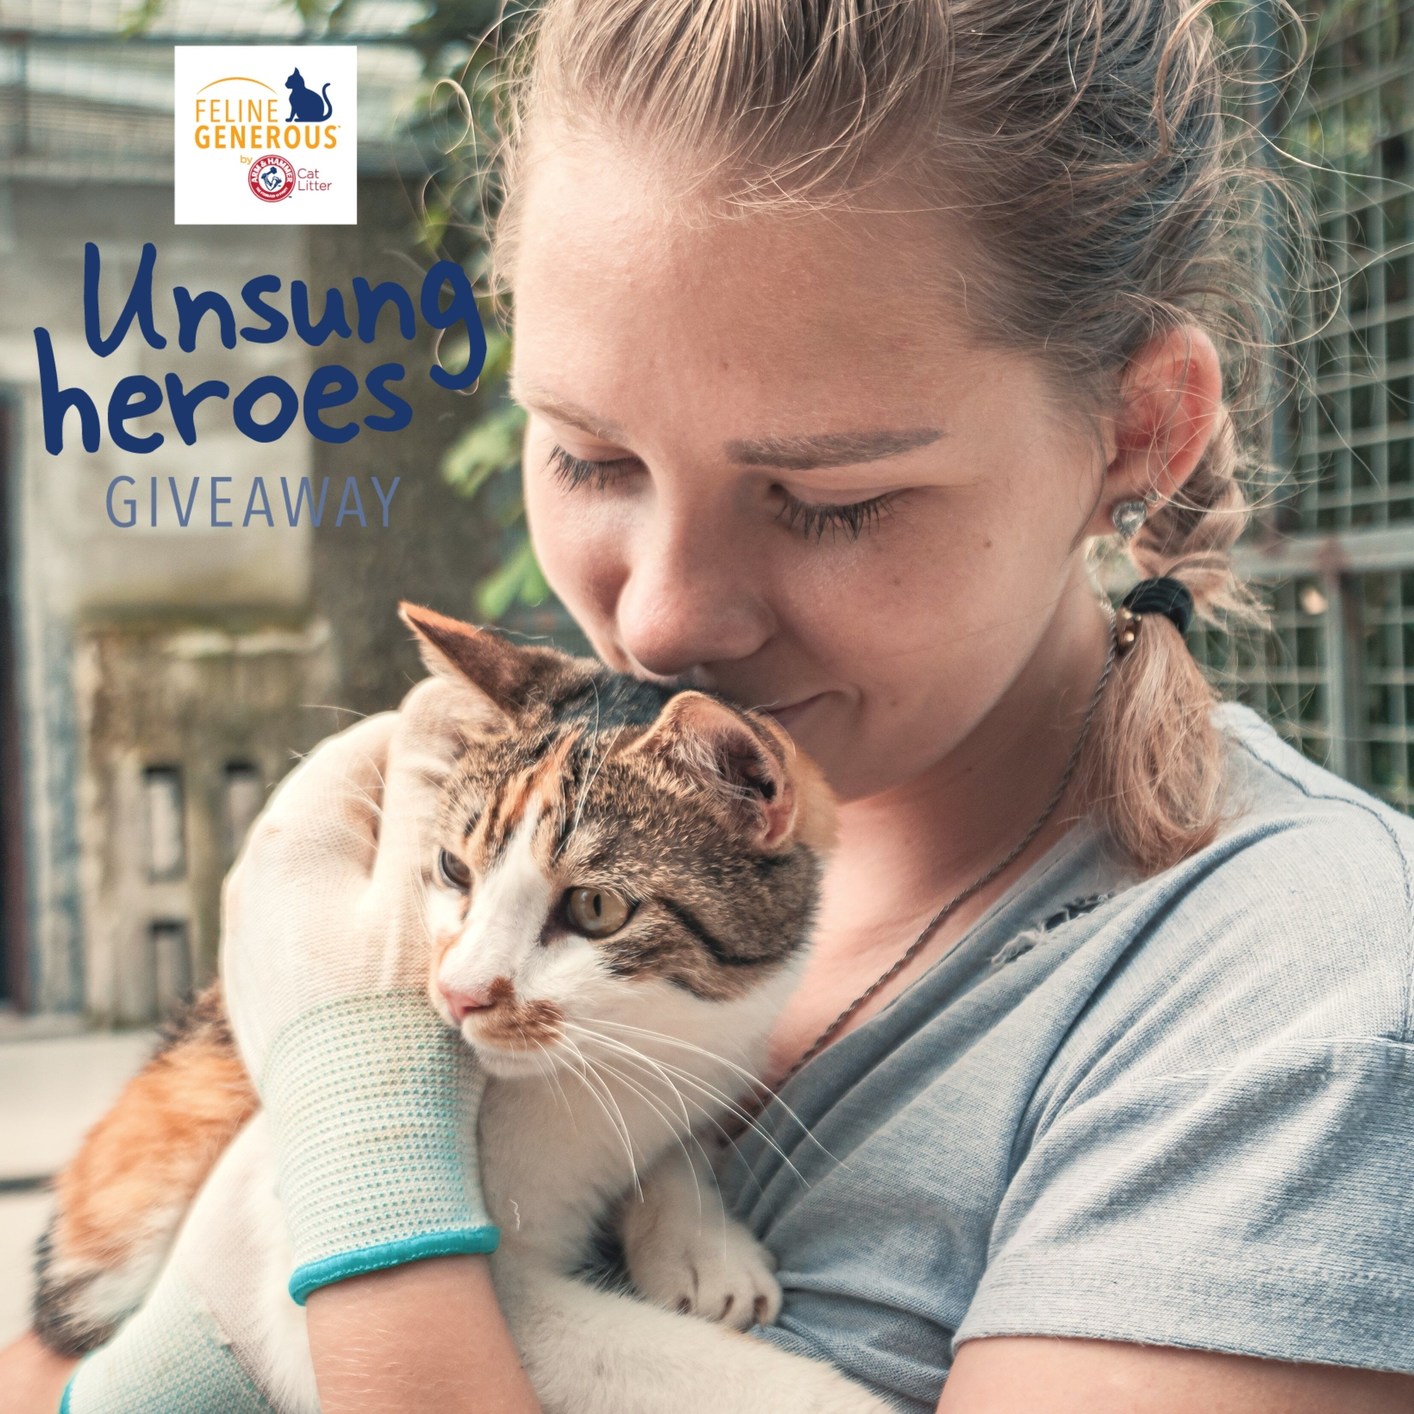 The ARM & HAMMER™ Feline Generous Program Launches “Unsung Heroes” Awards to Celebrate Staff and Volunteers at Cat Welfare Organizations and A Chance for Shelters to Win $30,000